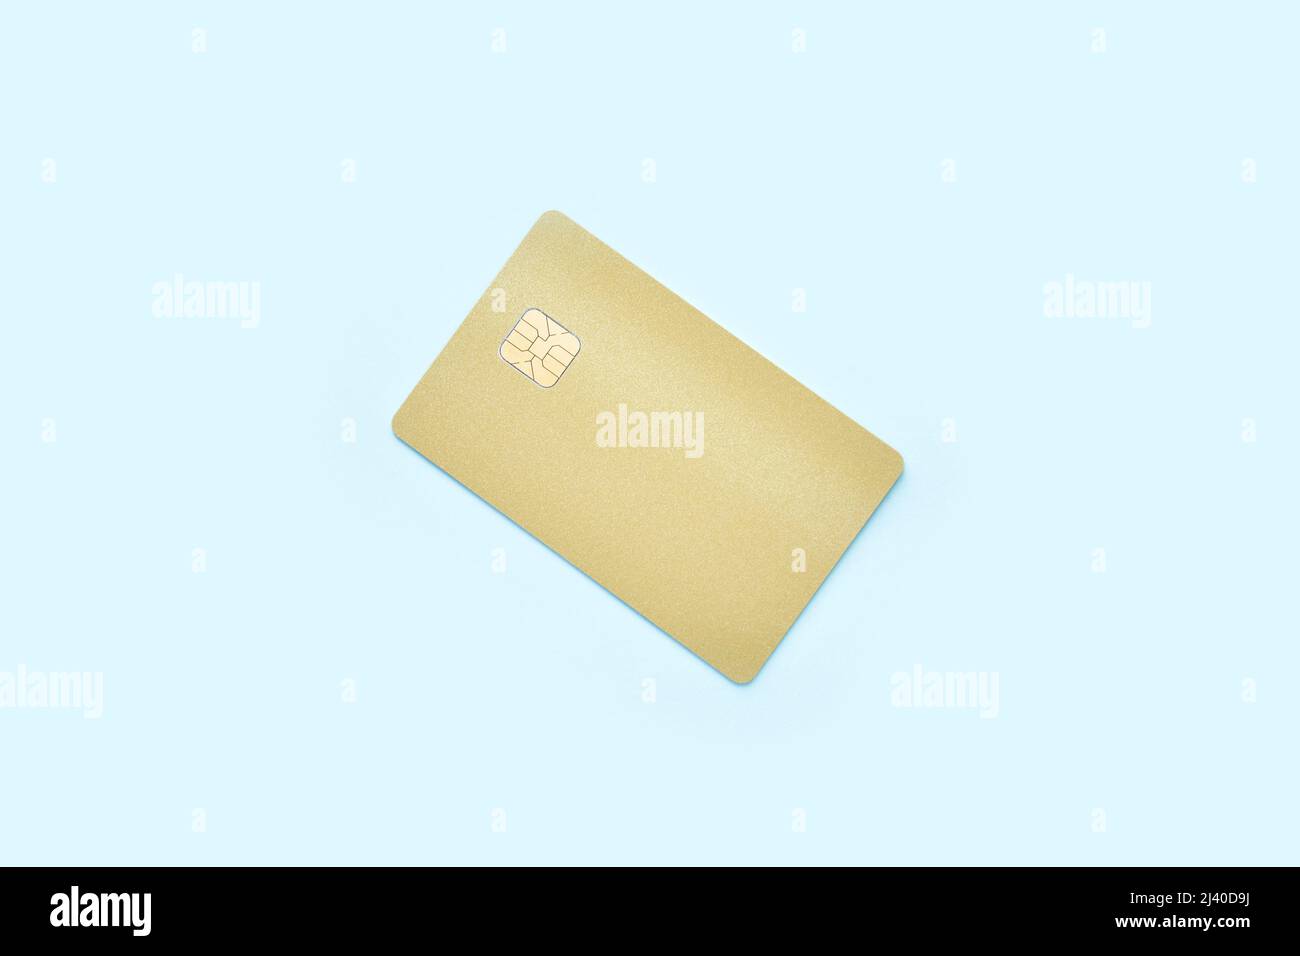 Plastic credit card mockup. Color blue and gold background. Atm empty debit payment. Currency shopping with stripe Stock Photo